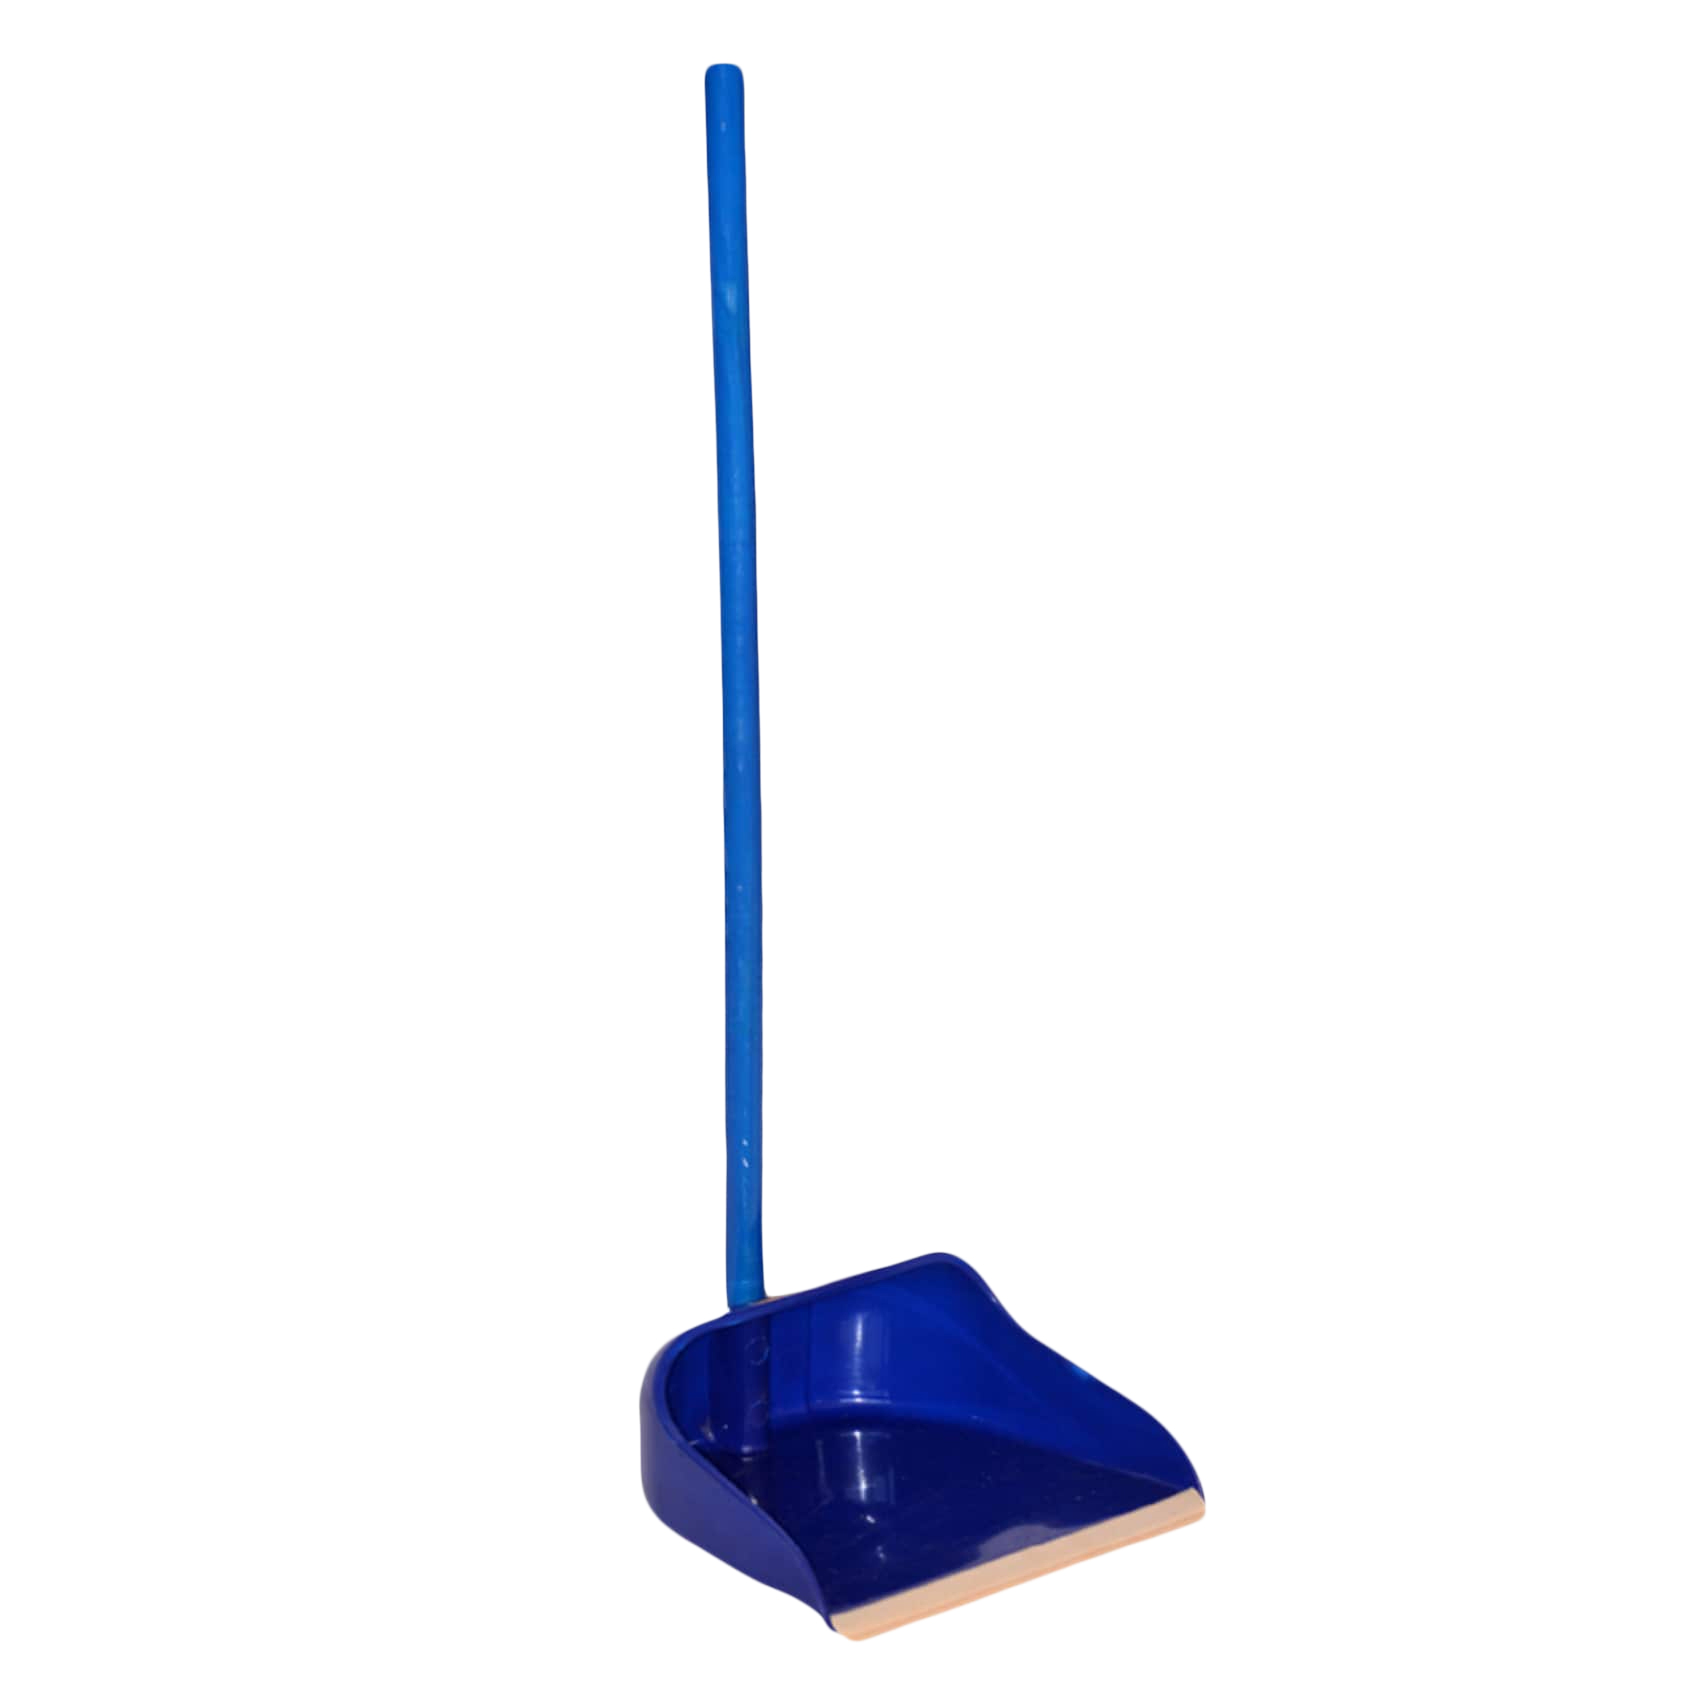 Teepee Stand Up Dustpan With Brush